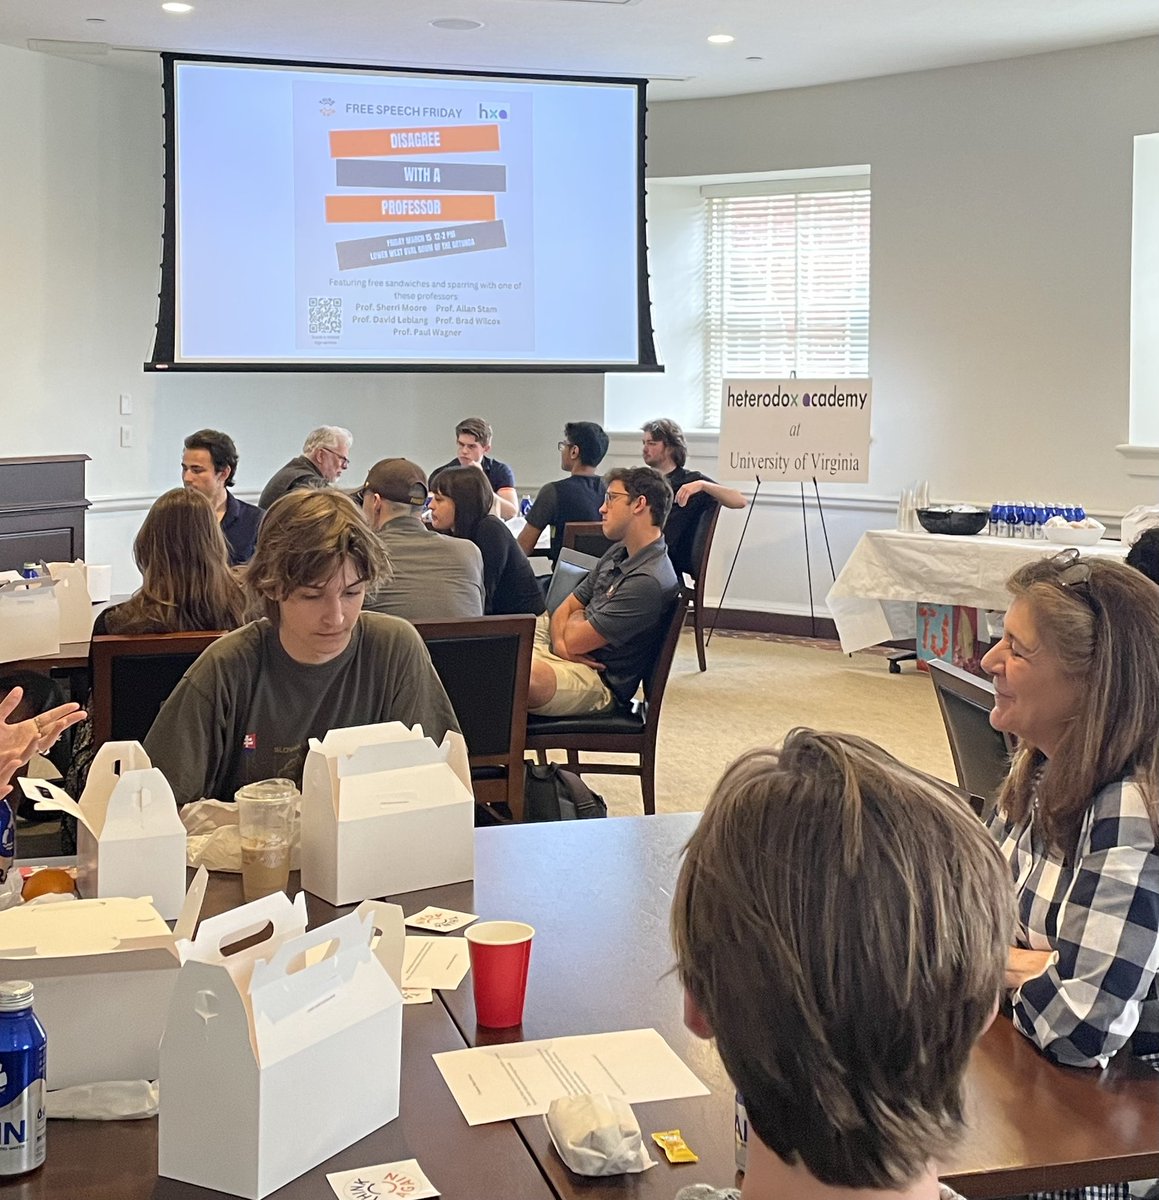 Dining and disagreement made for a terrific lunch for today’s Free Speech Friday event sponsored by @ThinkAgainUVA and @HdxAcademy @UVA. Thanks to the students who came to “Disagree with a Professor” and to our good natured professors @realDLeblang, @BradWilcoxIFS, Sherri…